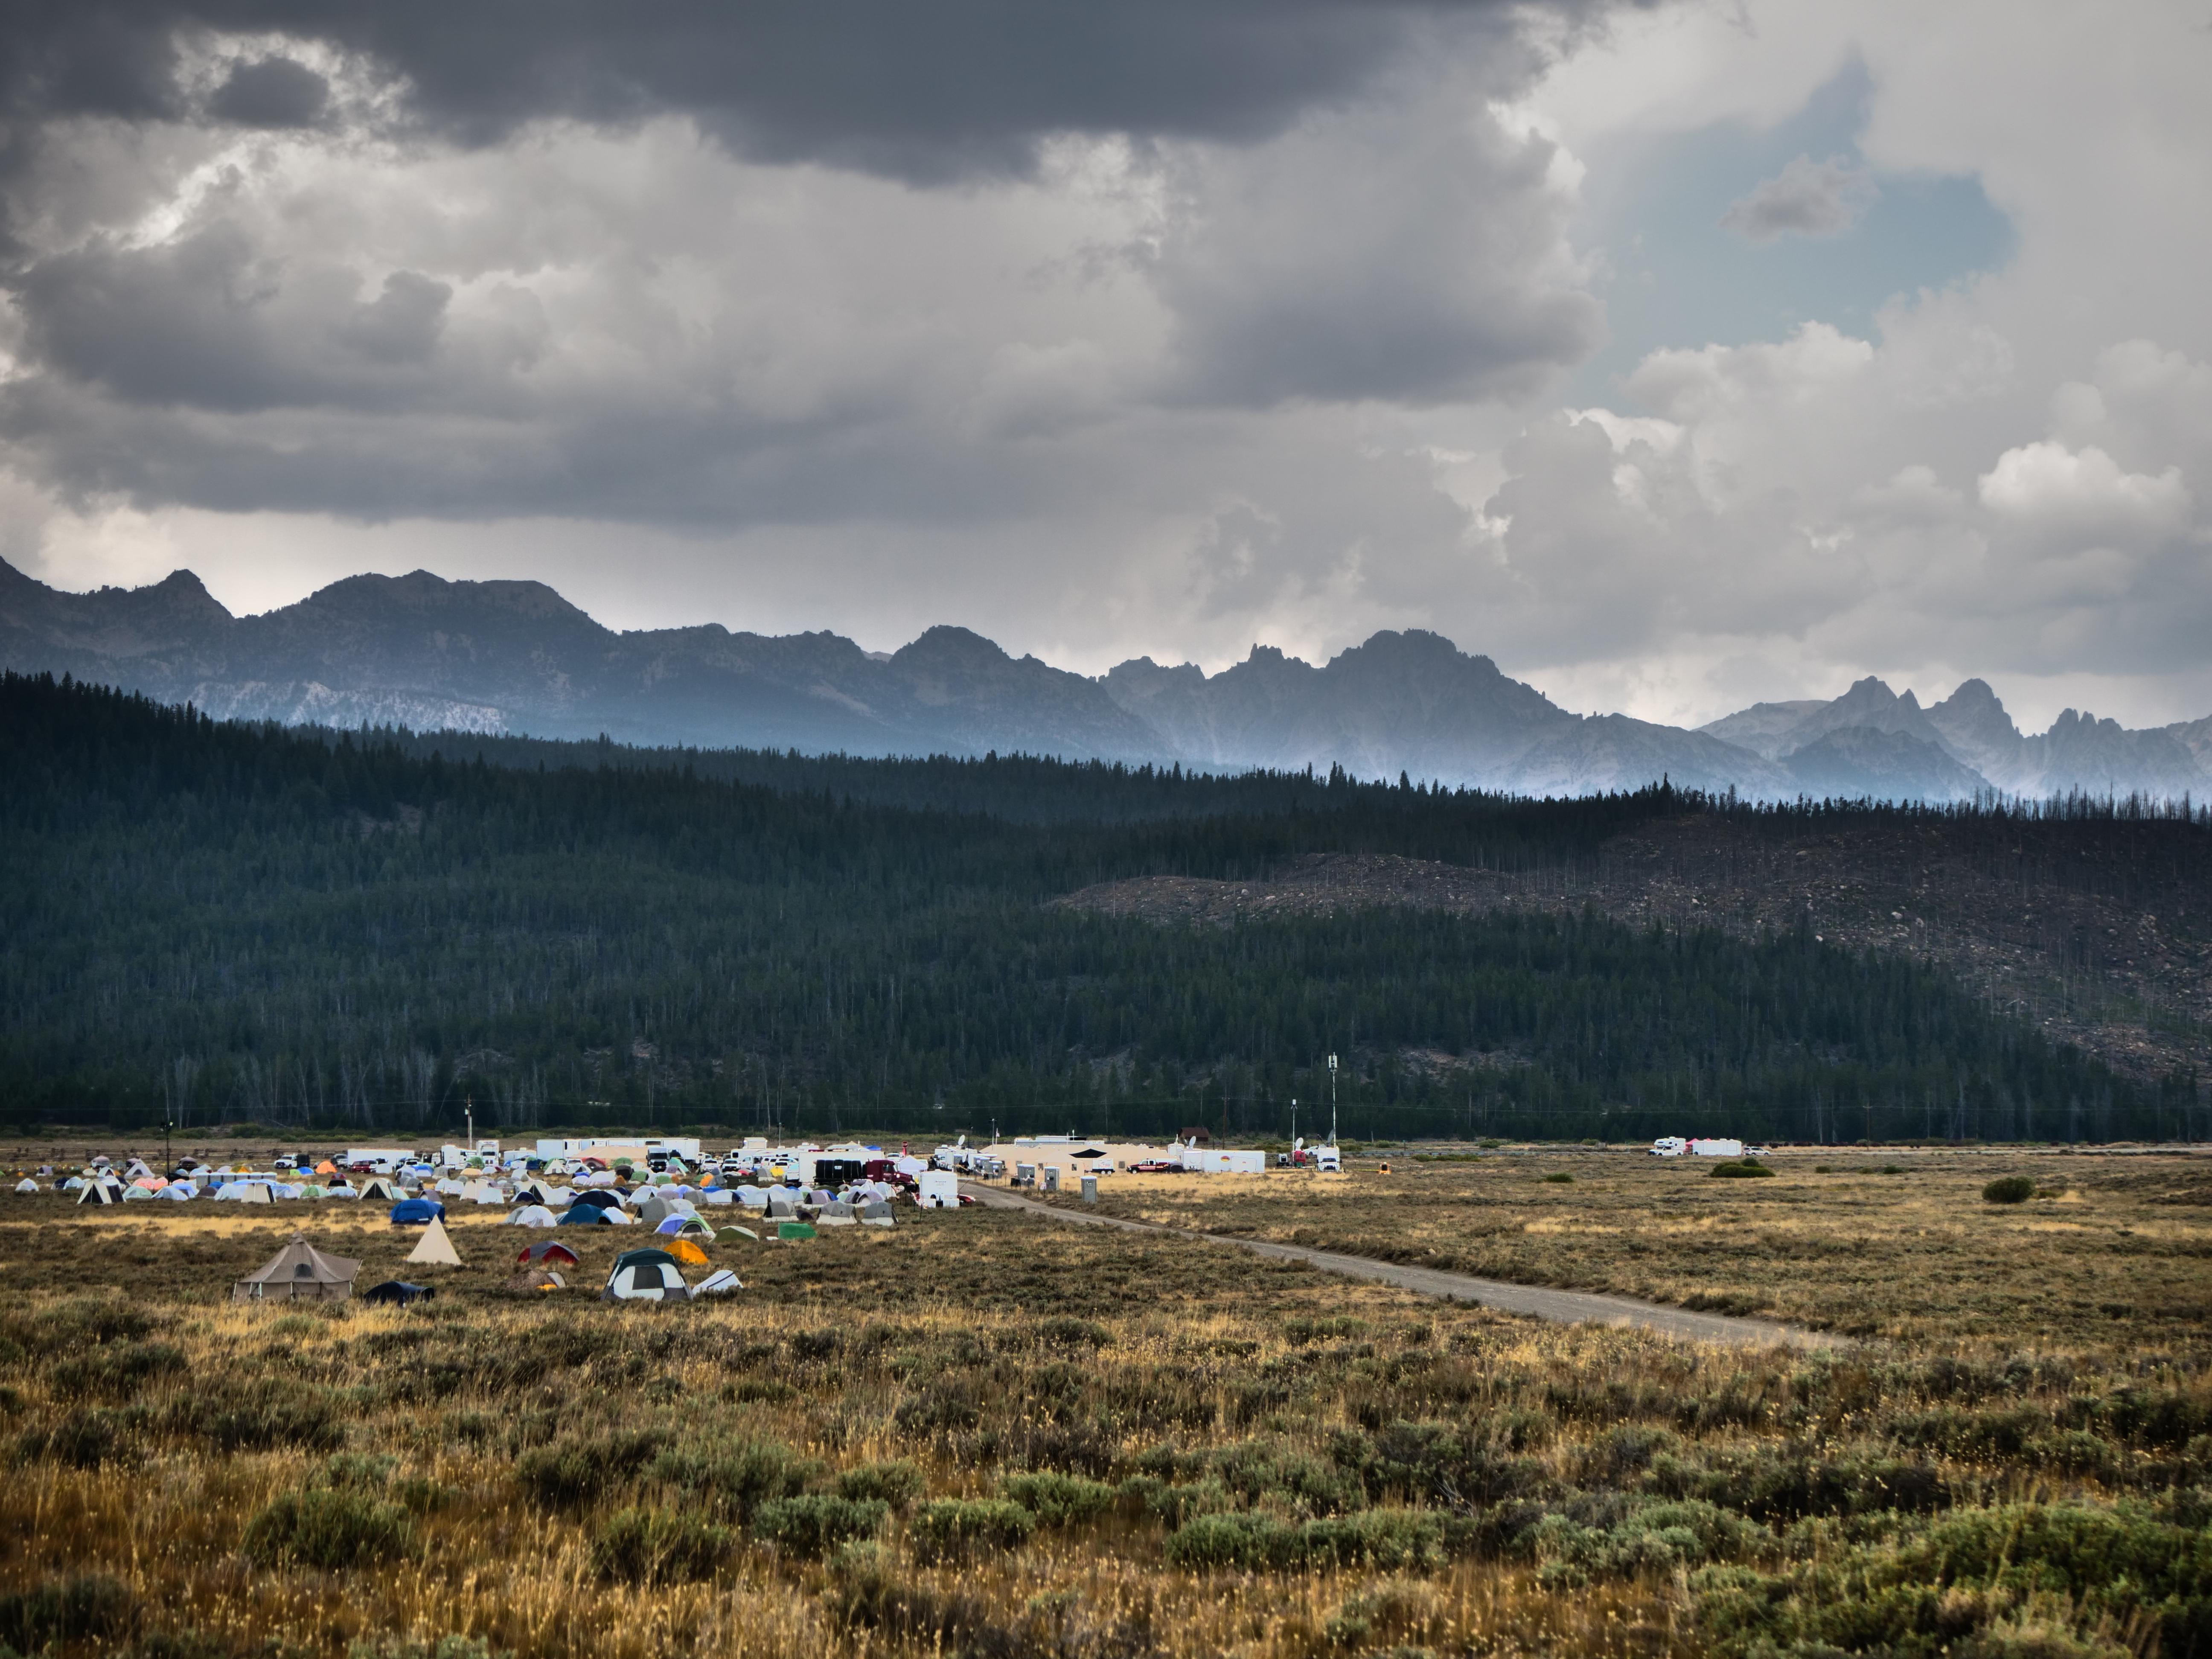 Mountains are seen in the distance with tents and a road in the foreground. The tents are of many colors and sit on a sagebrush covered plain.